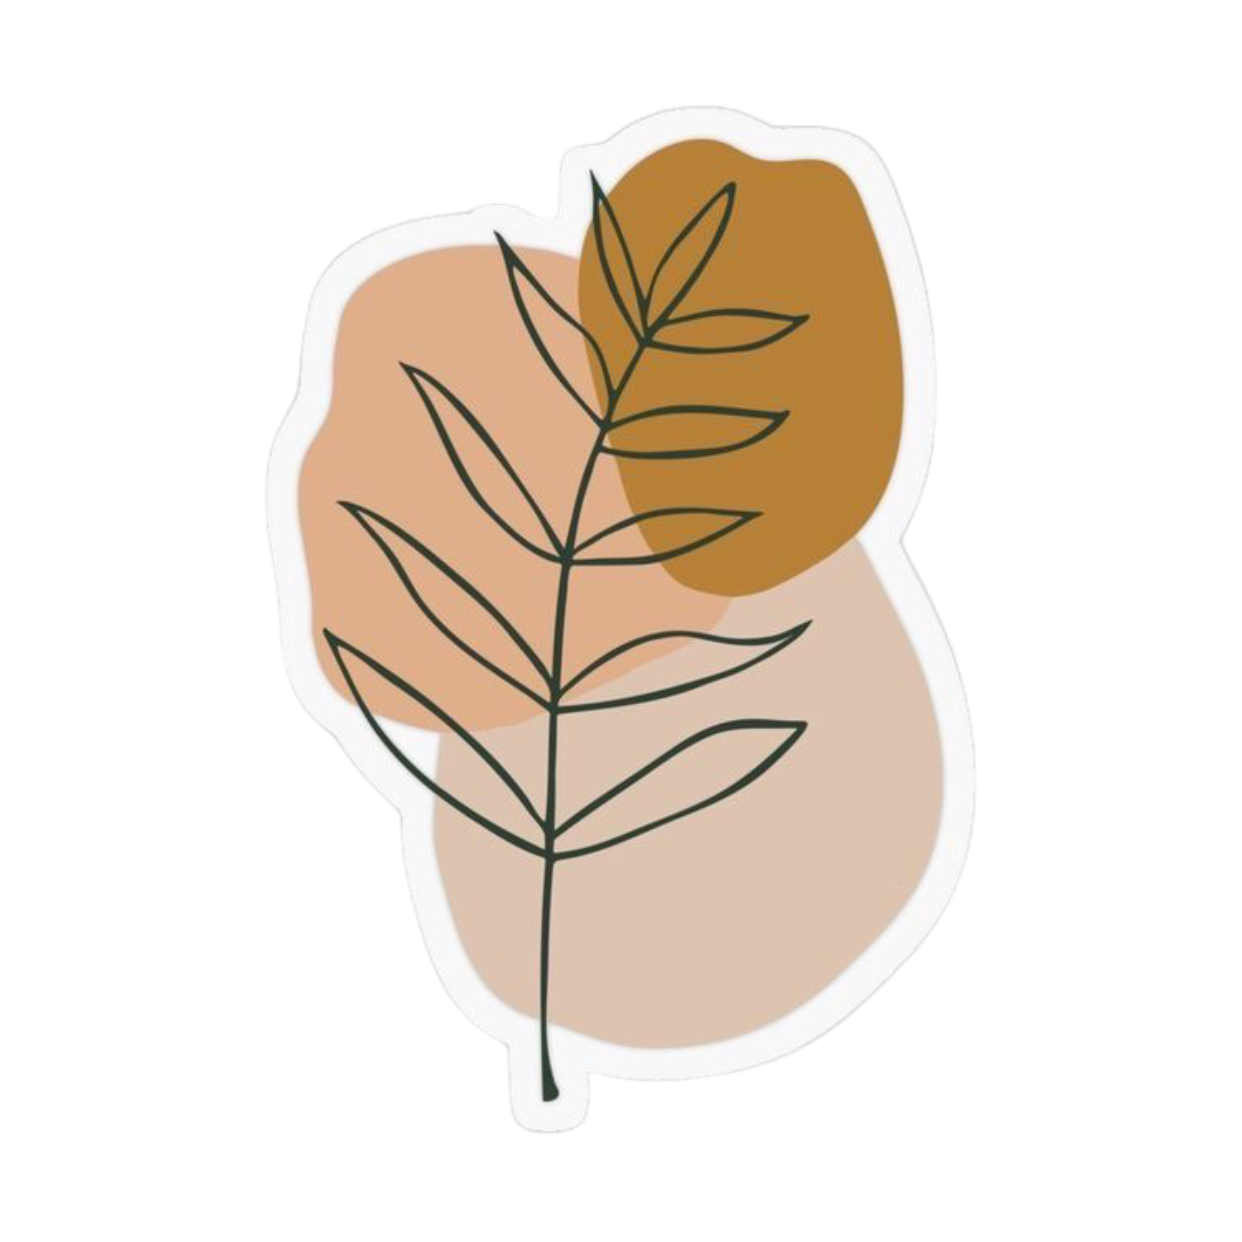 Aesthetic Sticker PNG Image HD